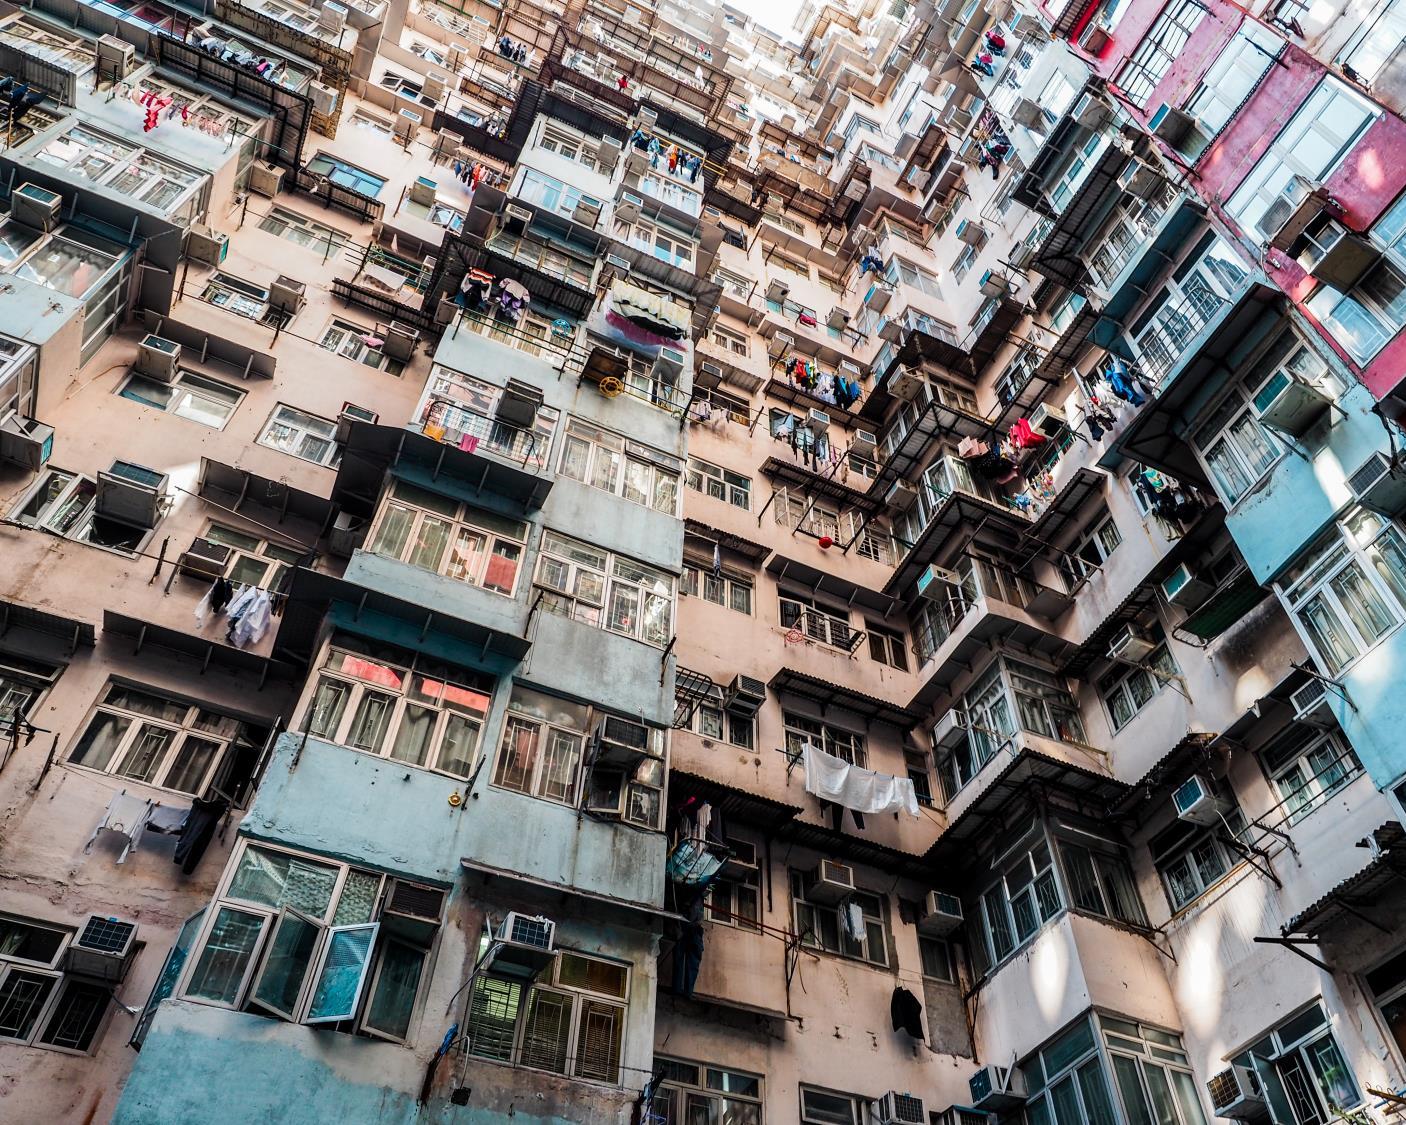 Hong Kong high-rise buildings photographed from the ground - Business ...